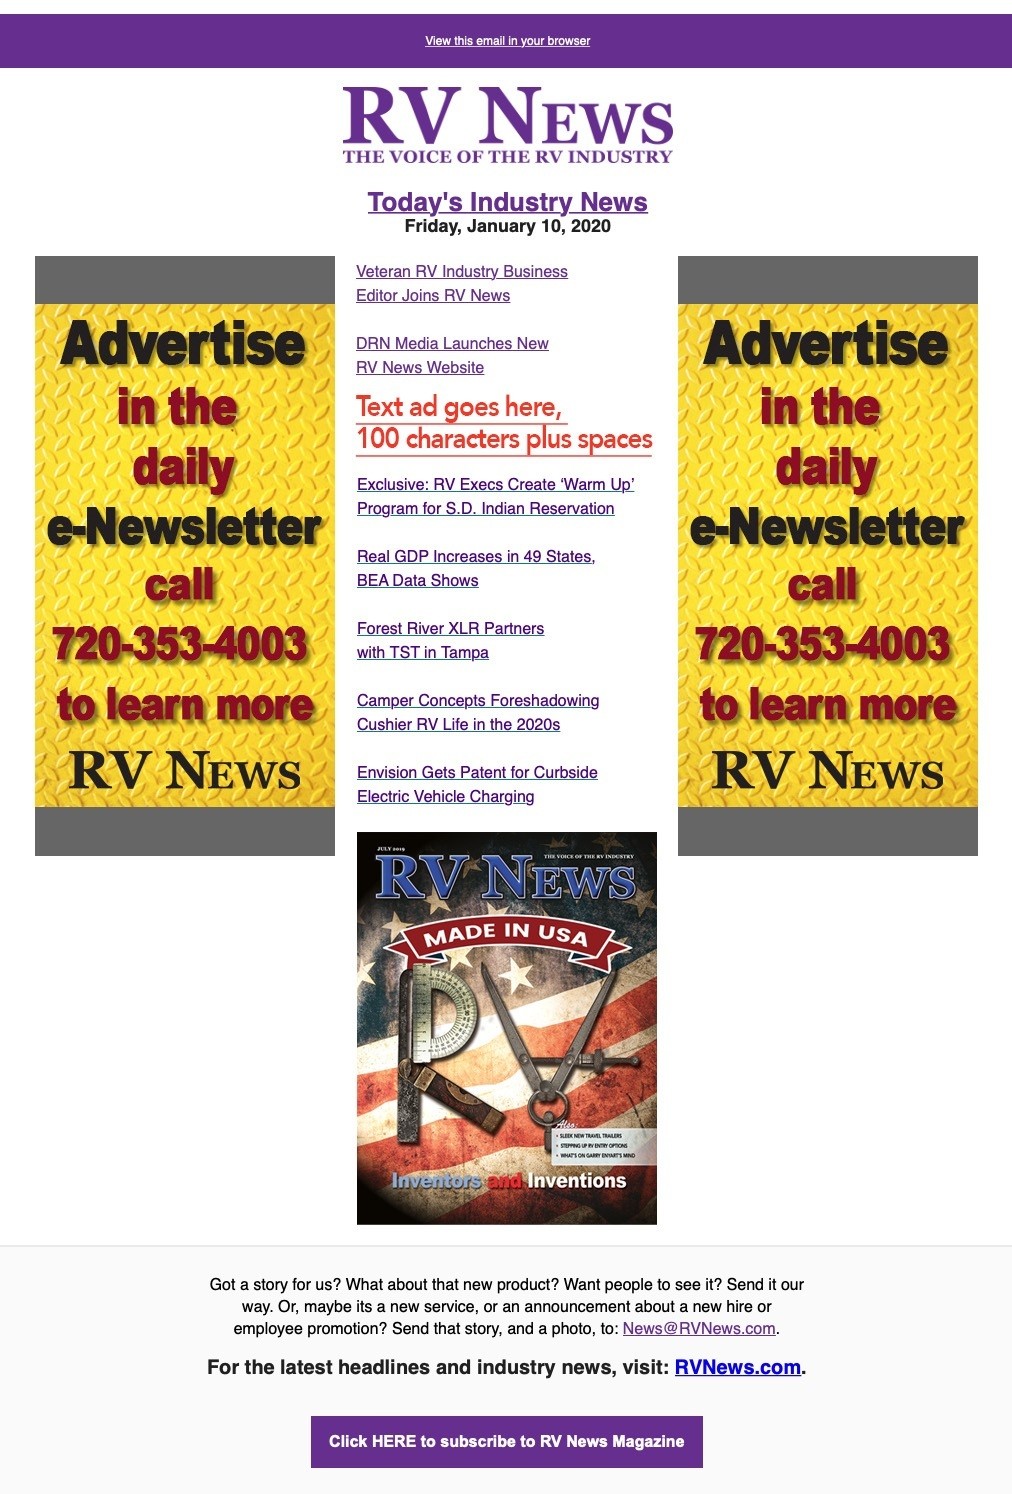 RV News enewsletter template with advertising spots